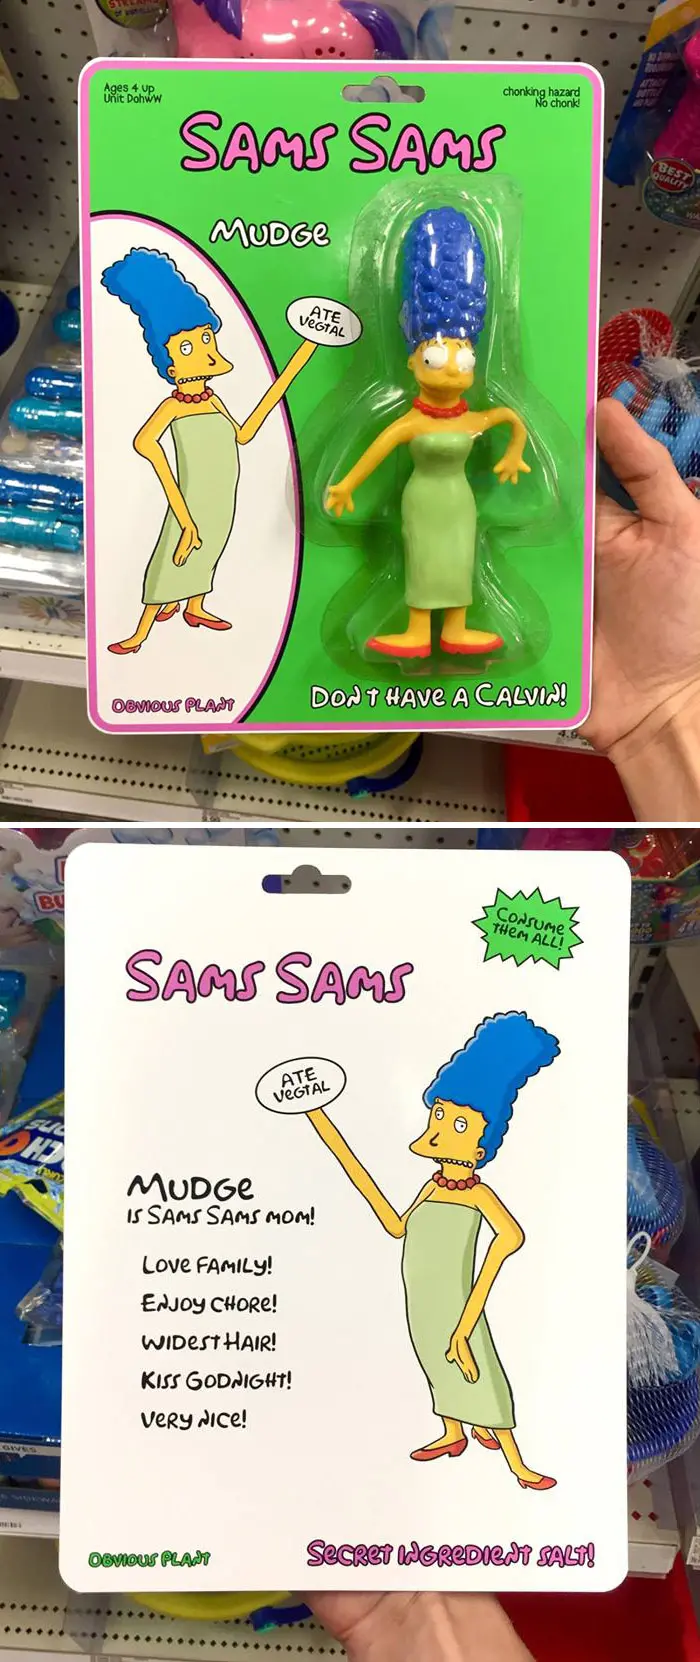 funny fake products obvious plant mudge samssams